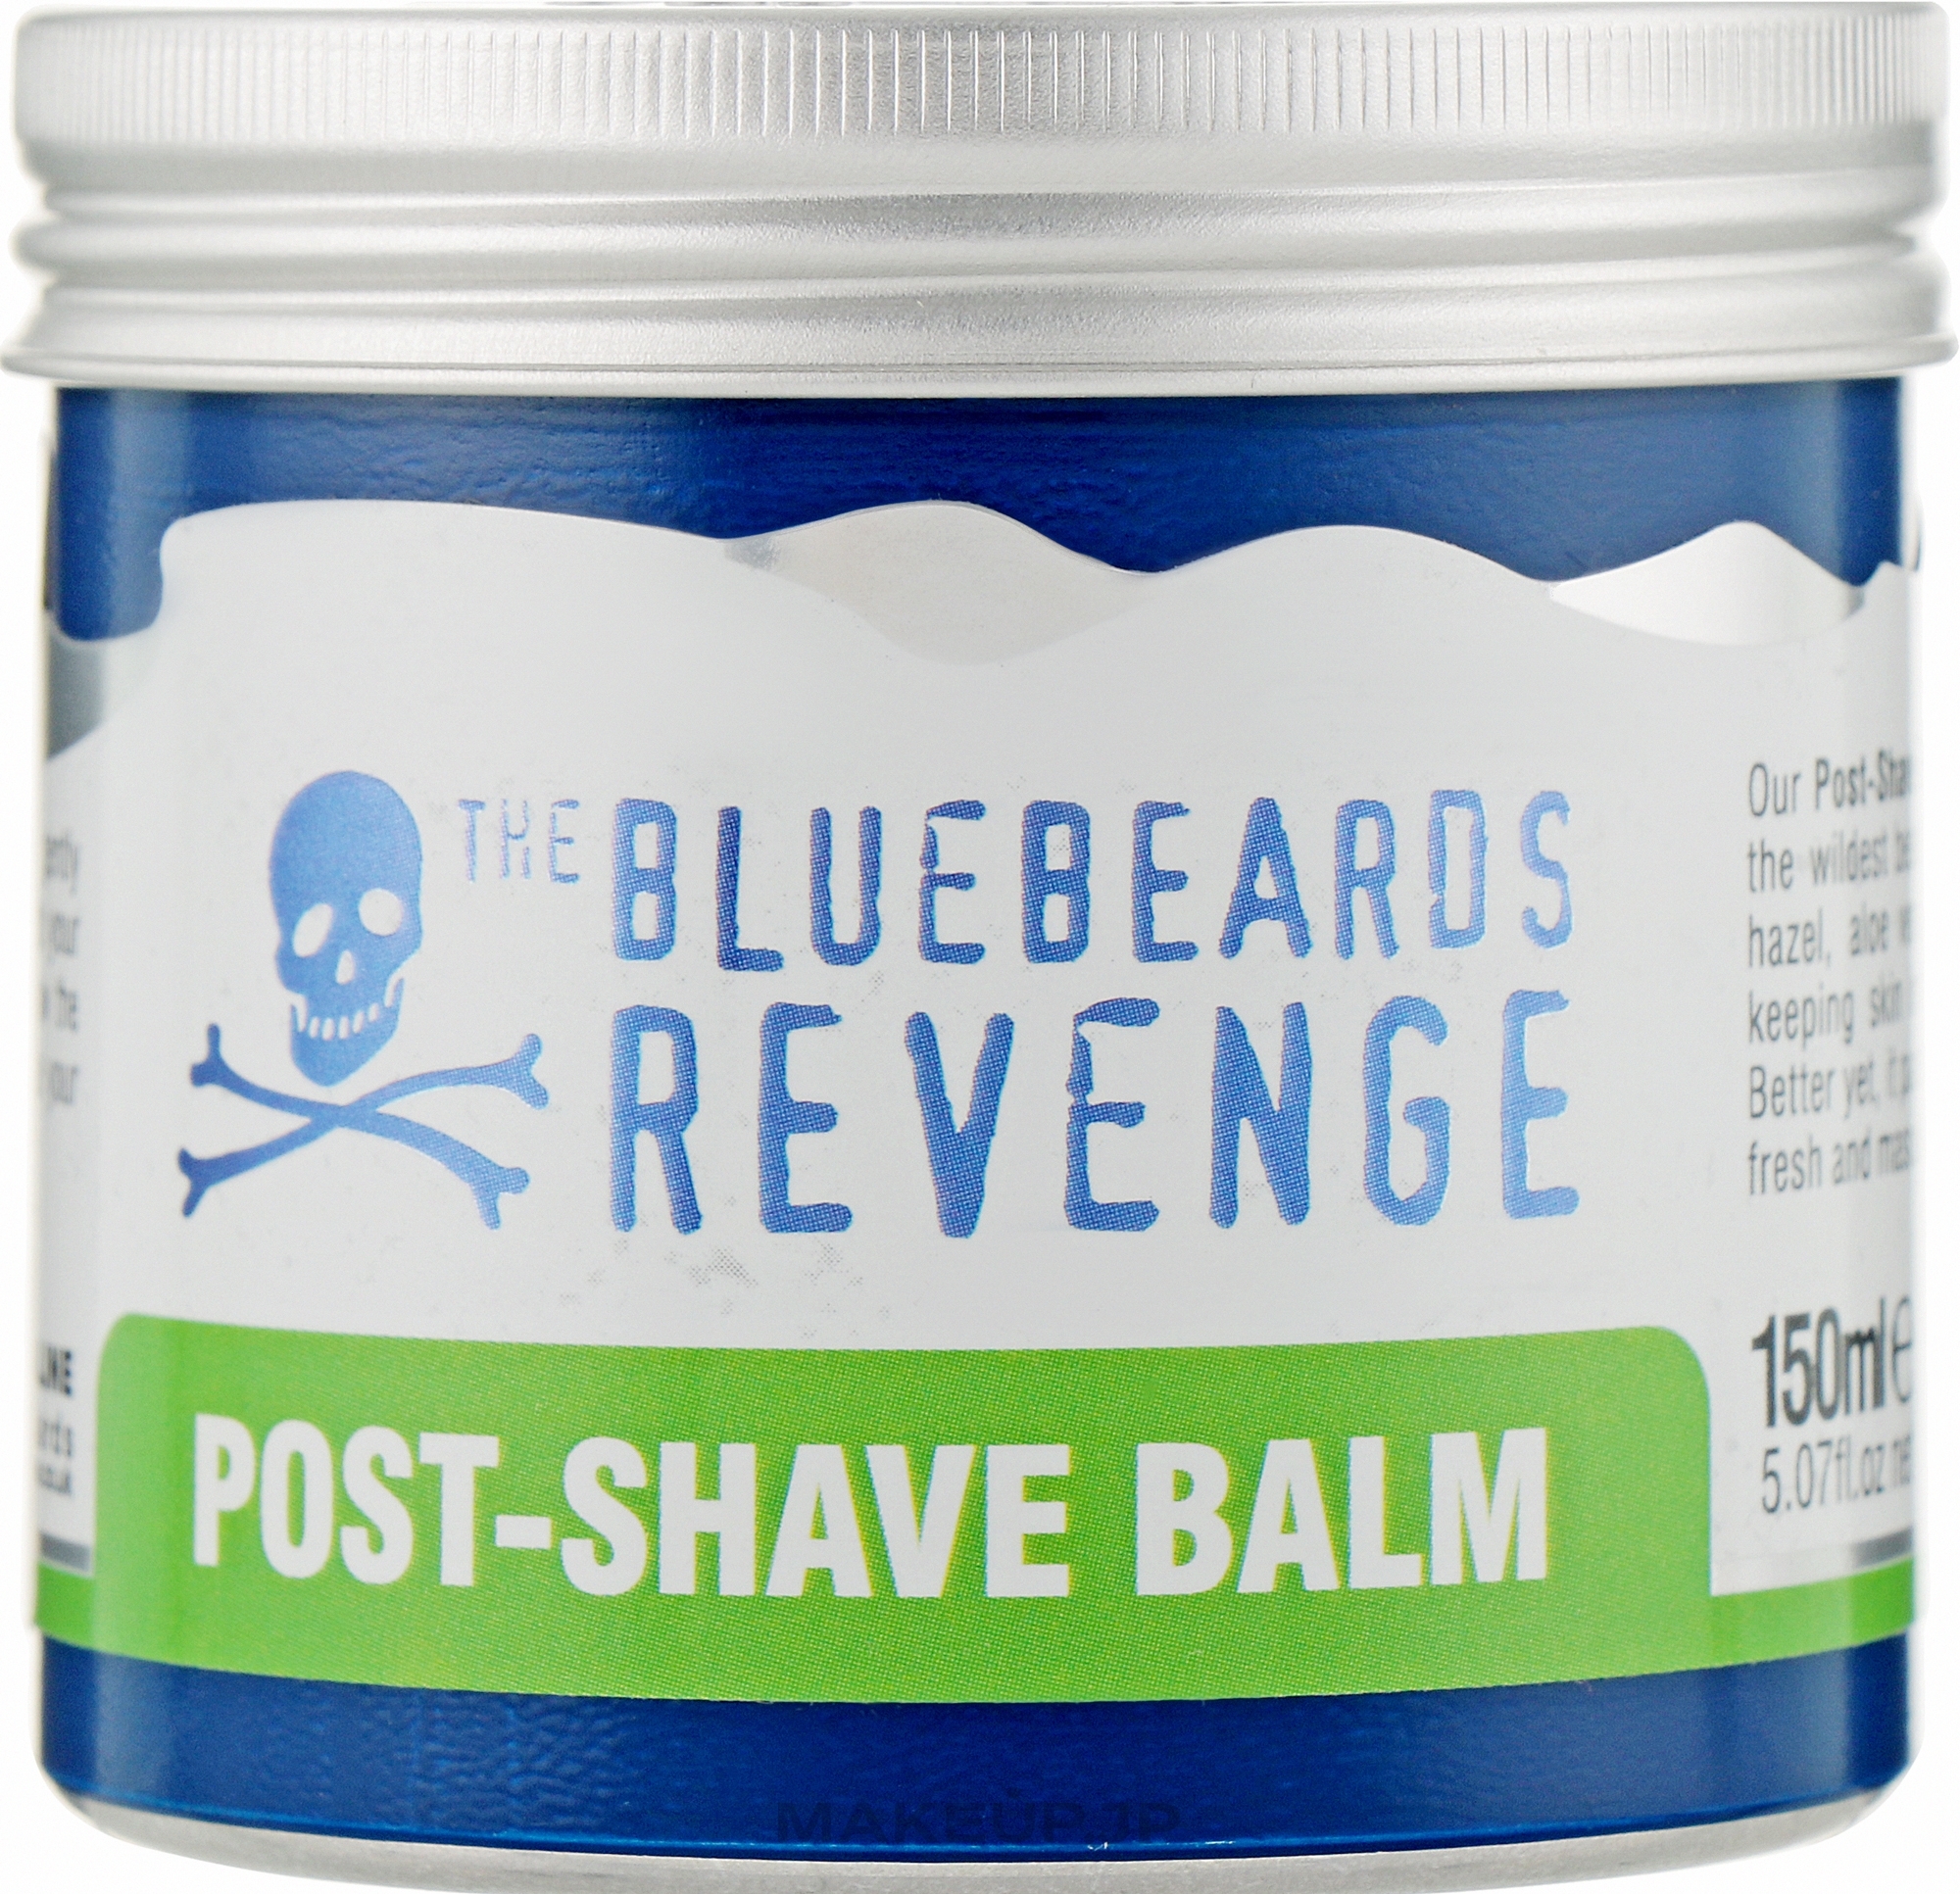 After Shave Balm - The Bluebeards Revenge Post Shave Balm — photo 150 ml